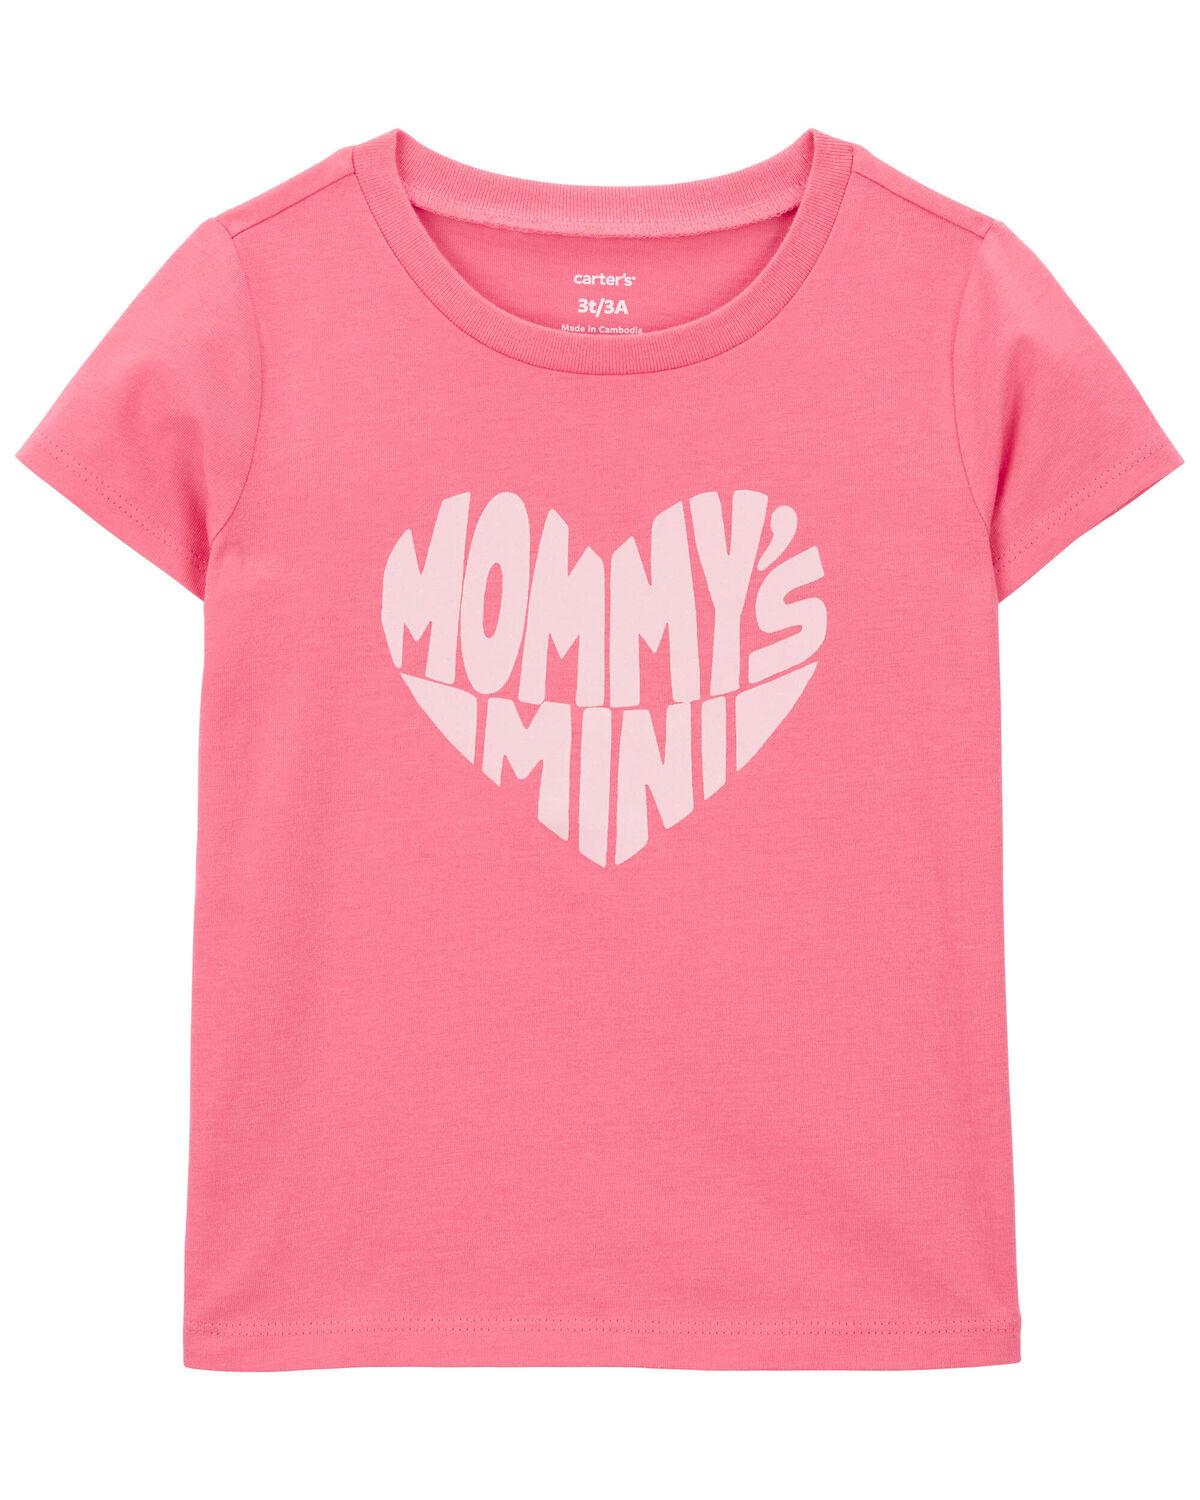 Pink Toddler Mommy's Mini Graphic Tee | carters.com